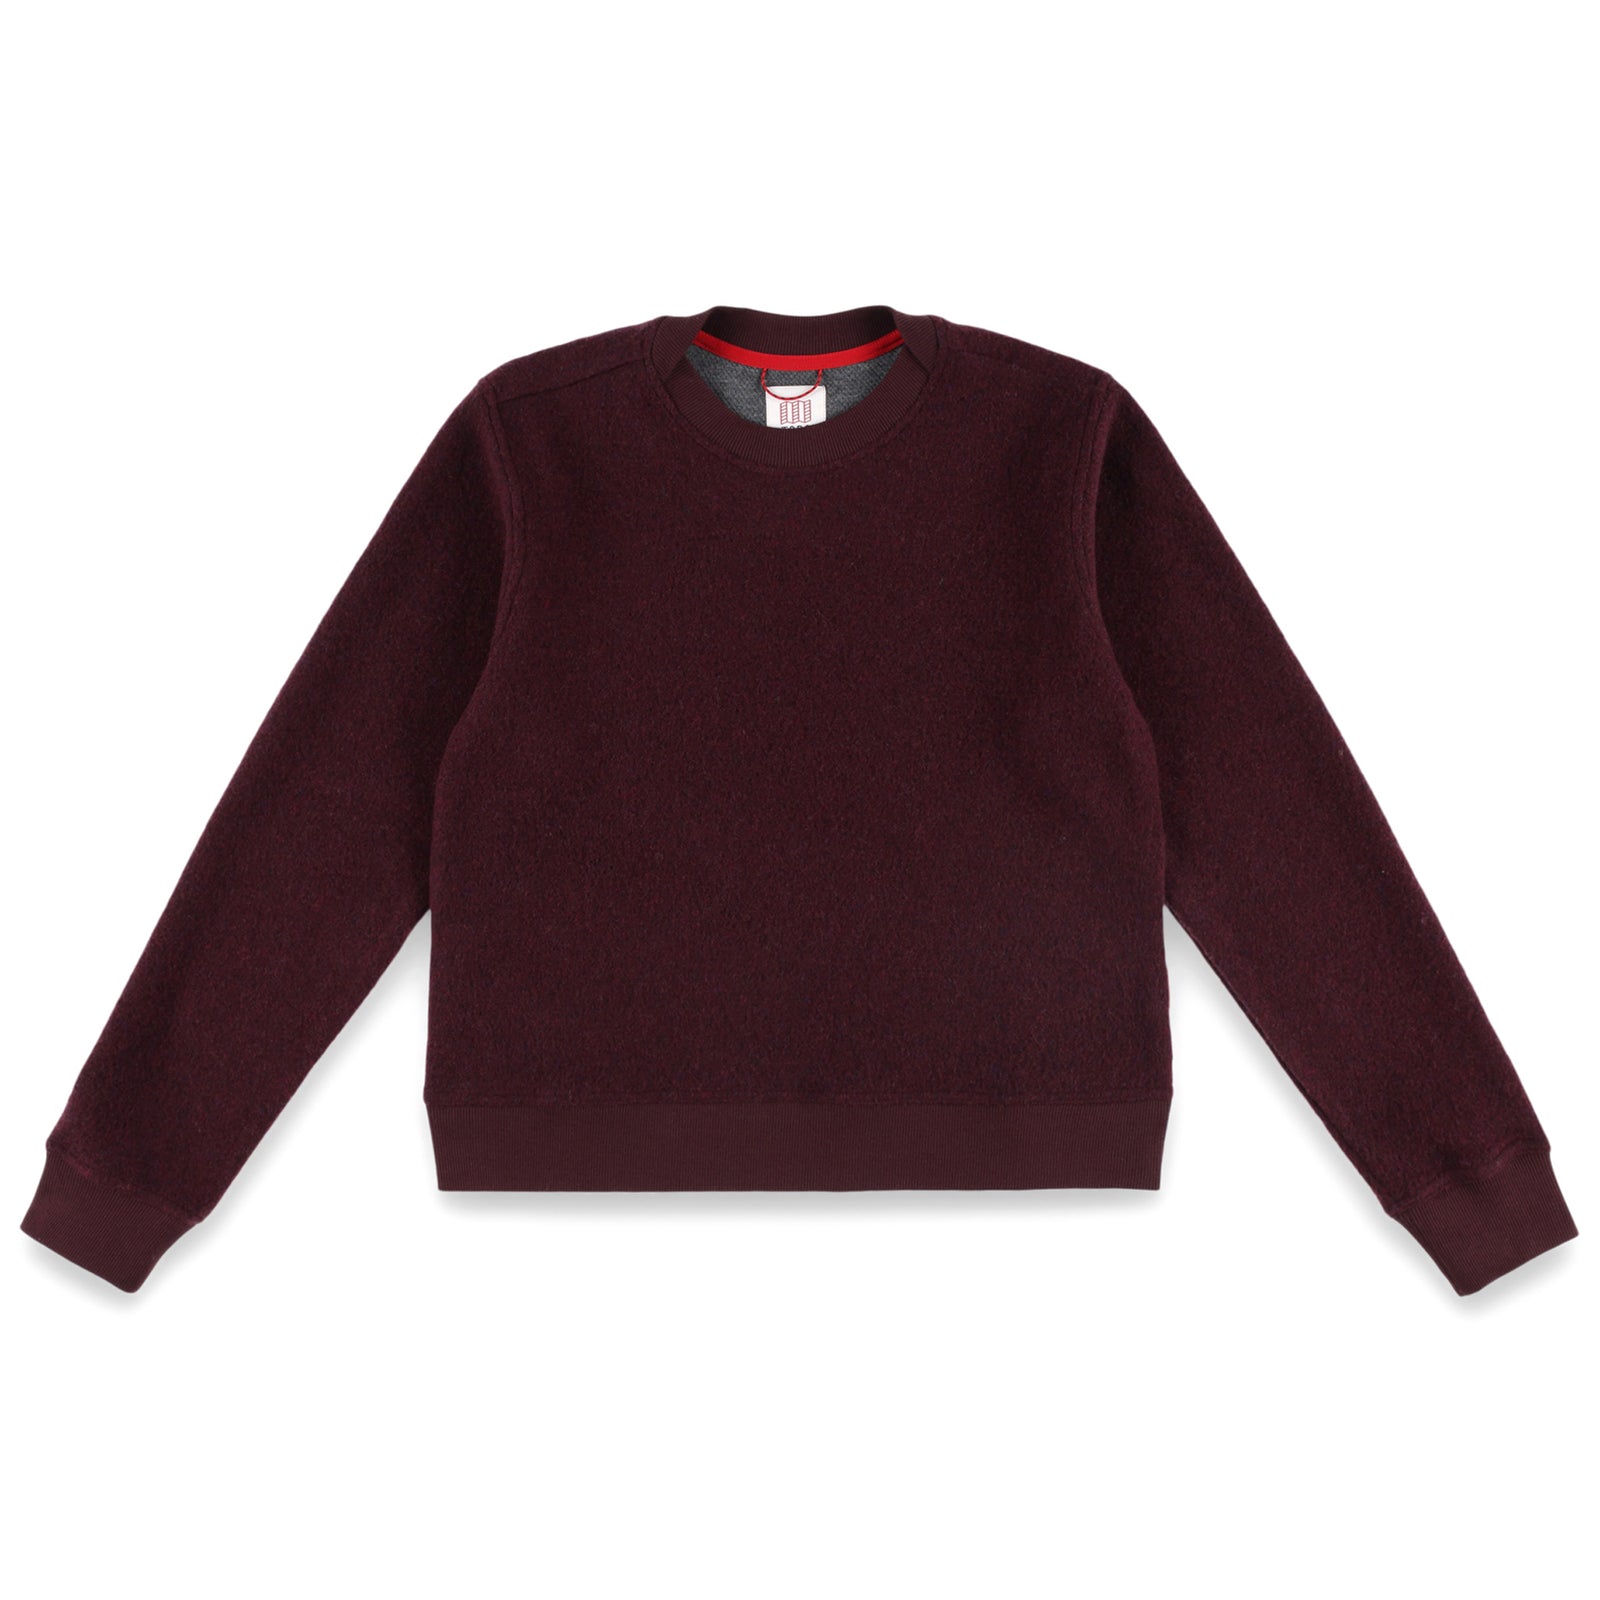 Topo Designs Women's Global Sweater recycled Italian wool crewneck pullover in "Burgundy" red